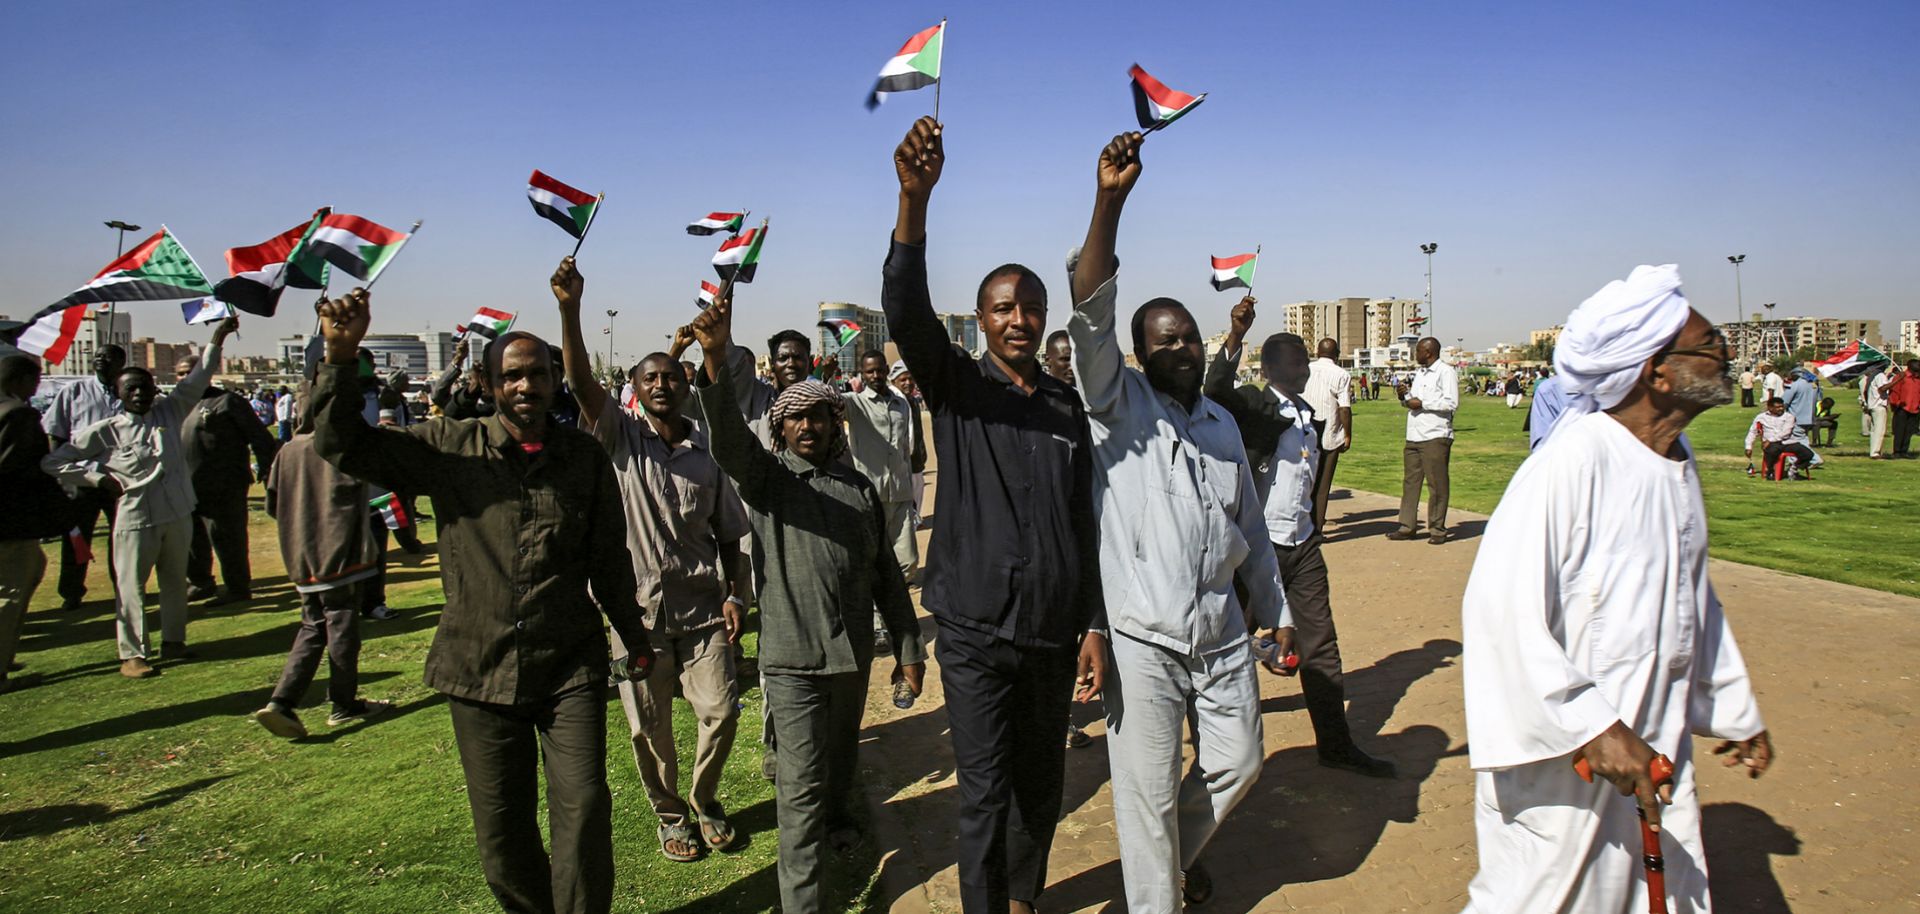 Supporters of President Omar al Bashir wave Sudanese flags during a rally for him at the Green Square in the capital Khartoum on Jan. 9, 2019.